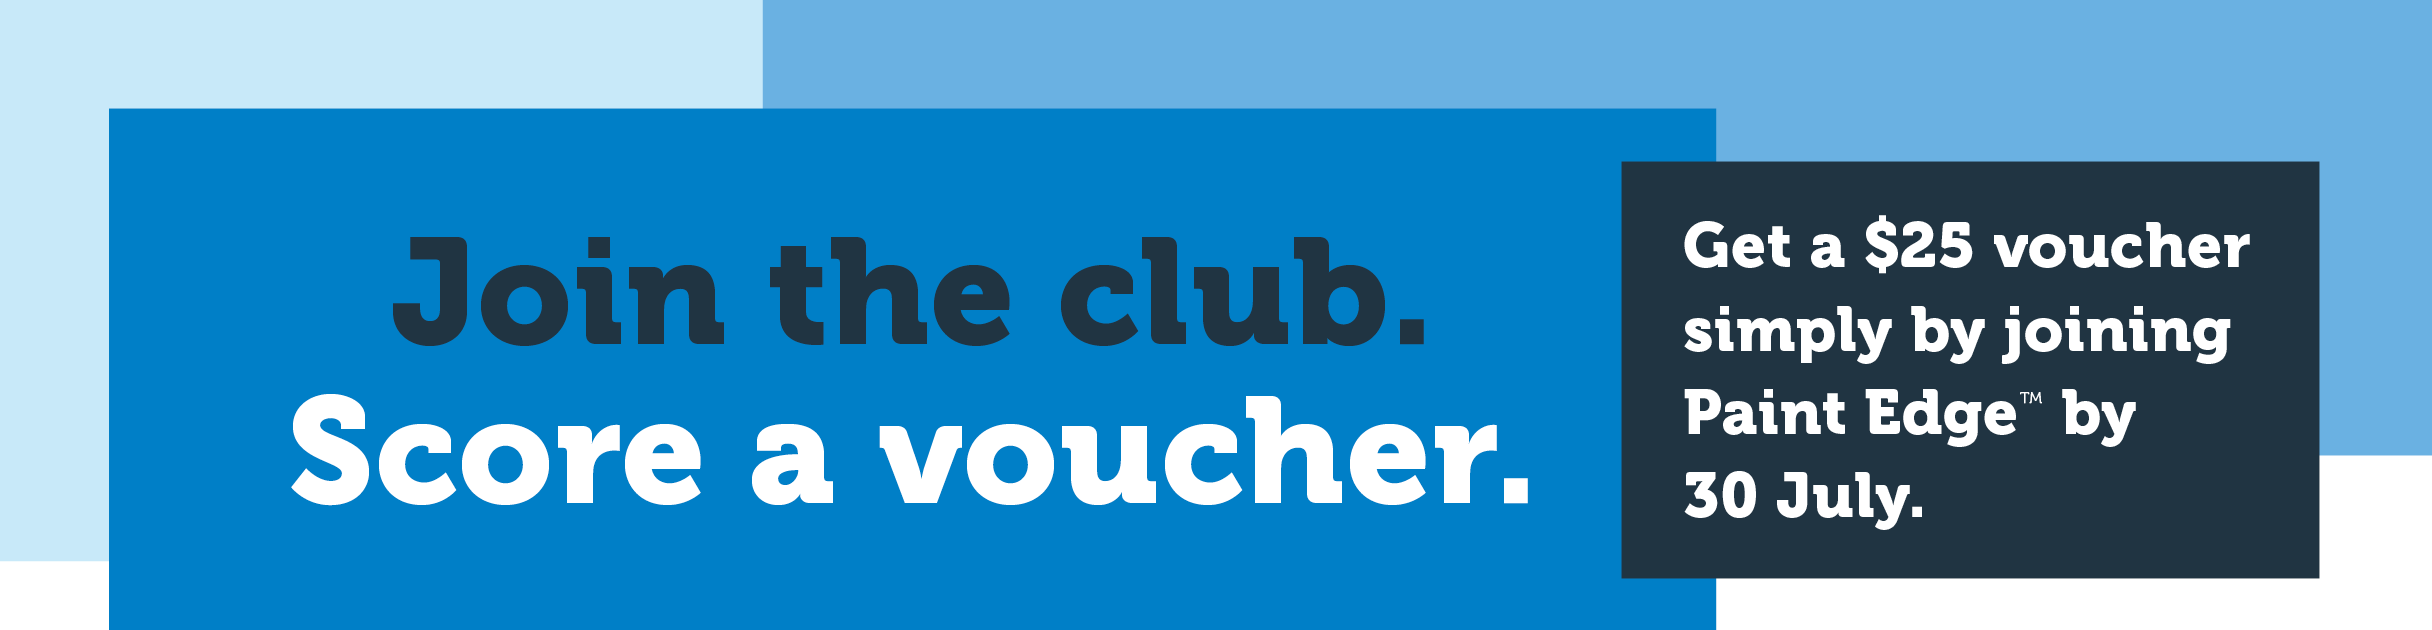 Join the club. Score a voucher.